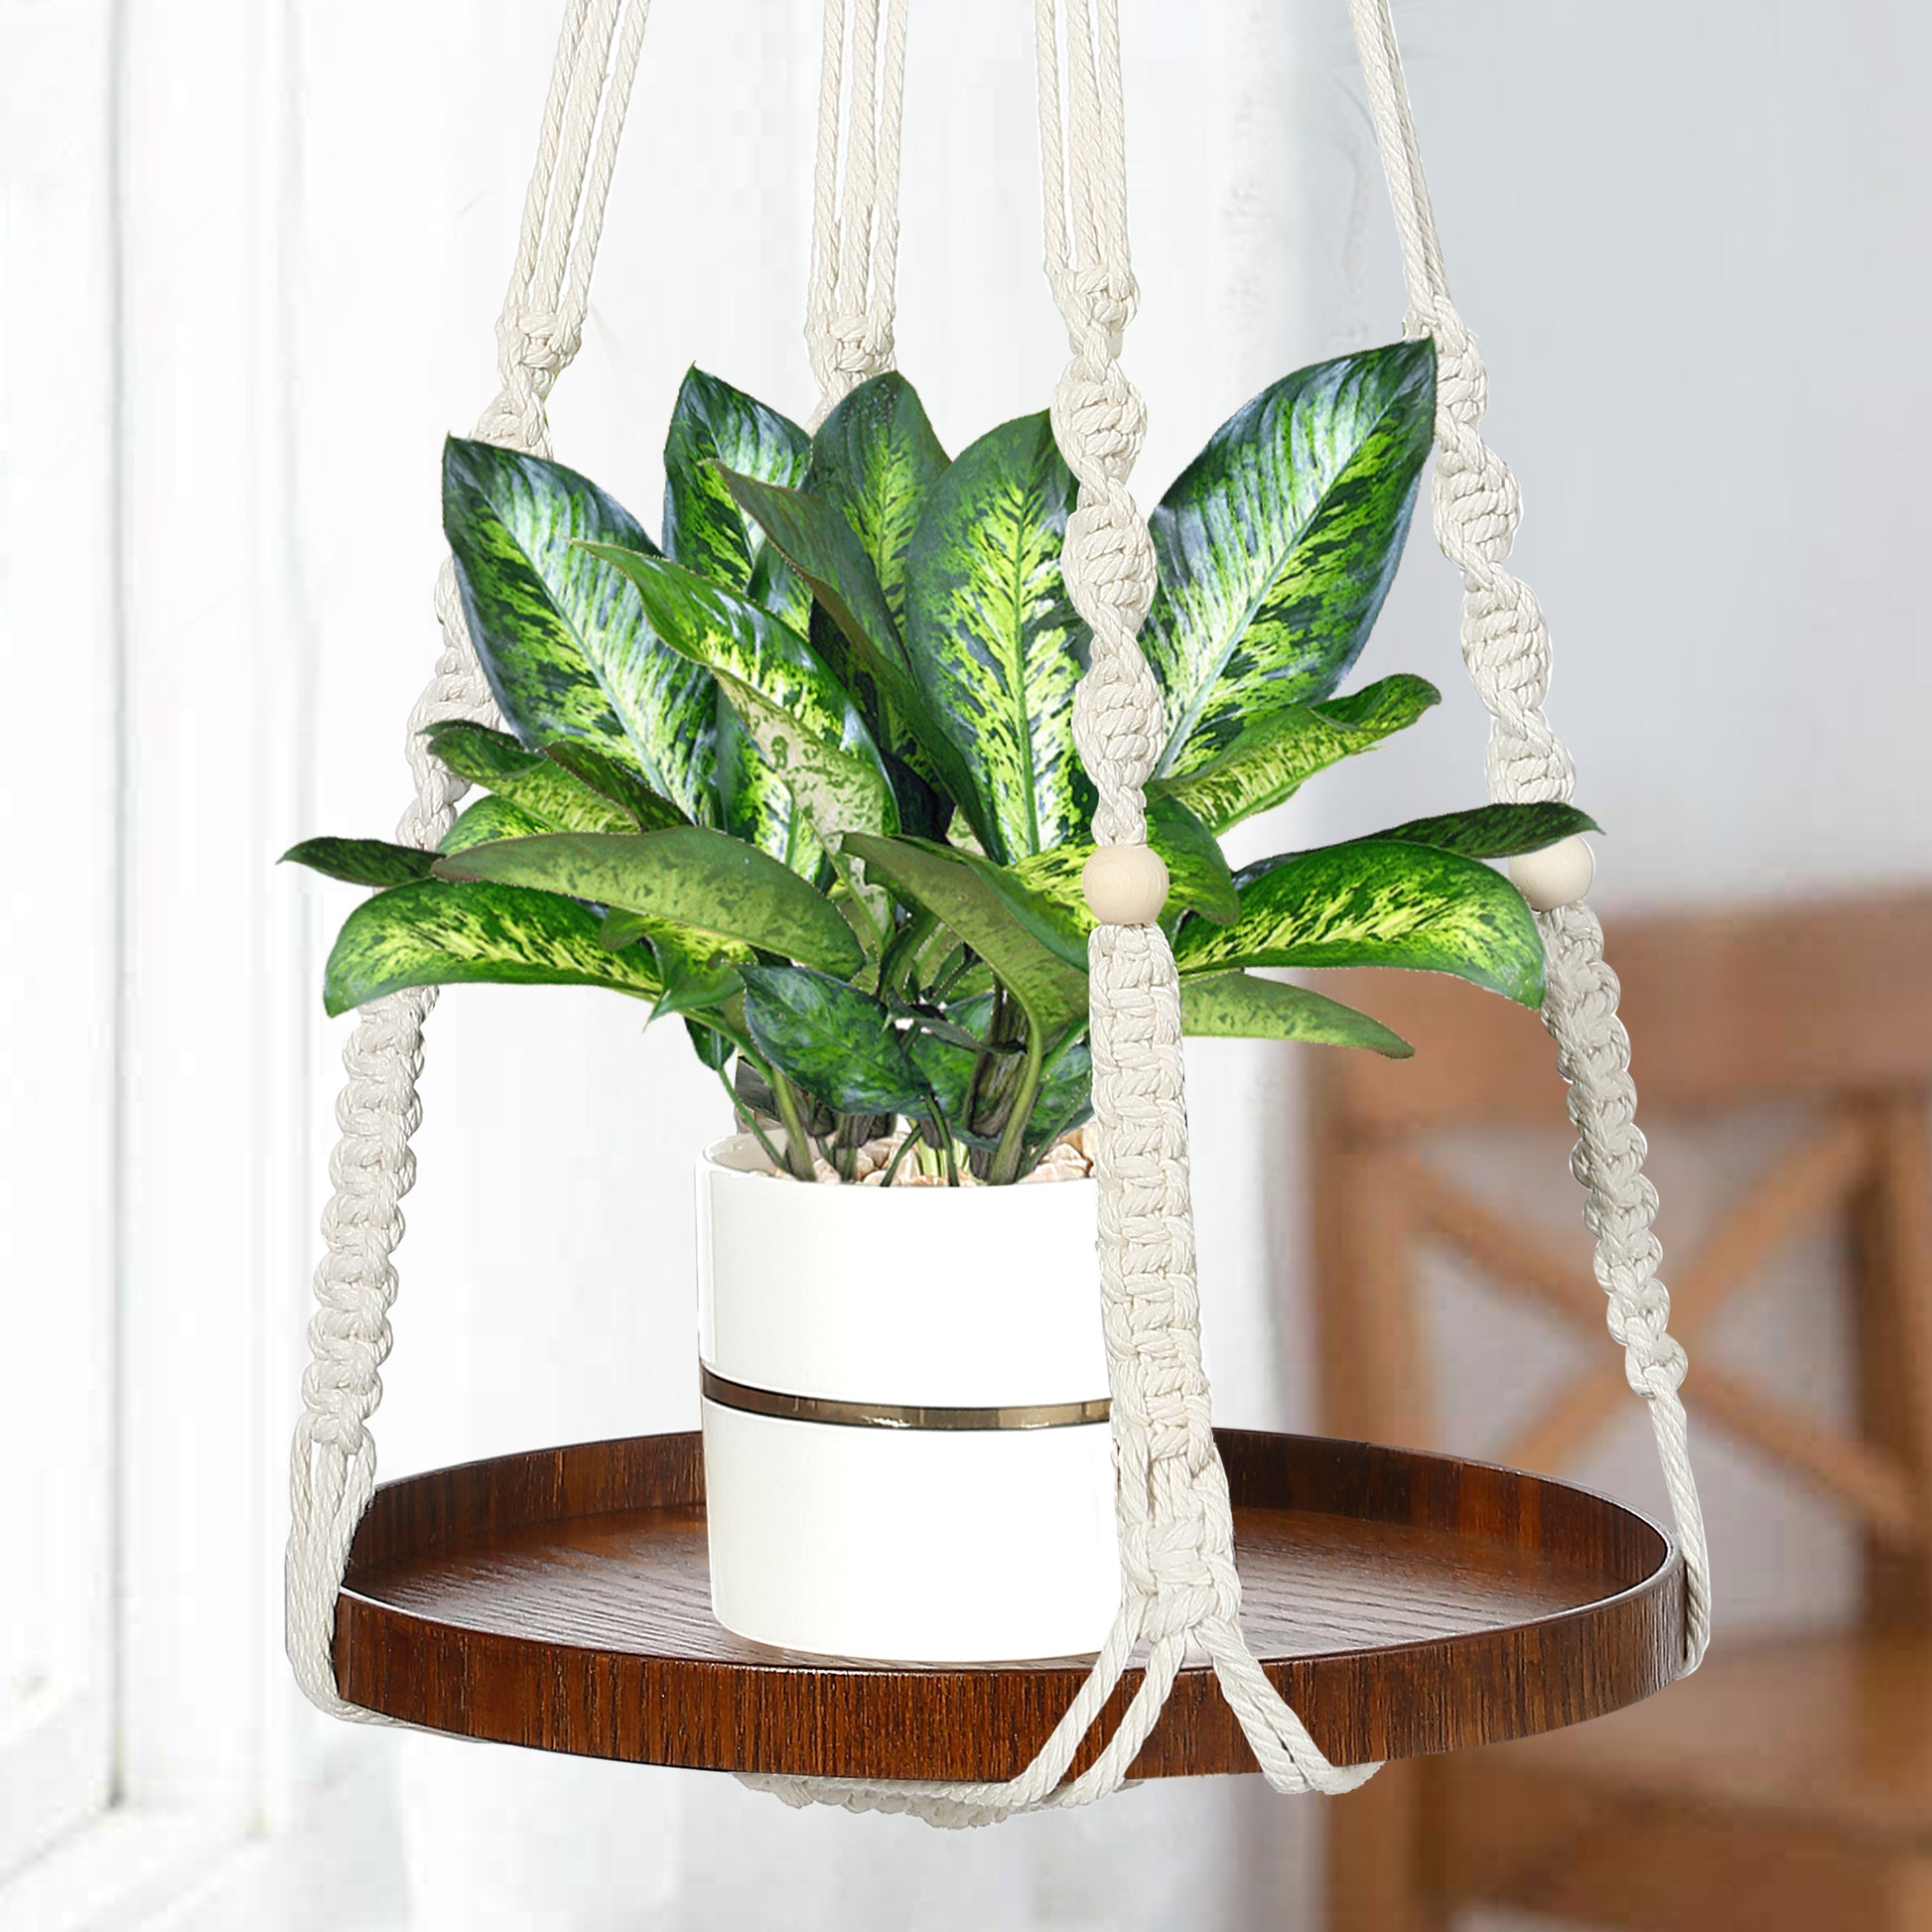 Buy Now Macrame Cotton Plant Hanger with Wooden Tray Online | Shineloha